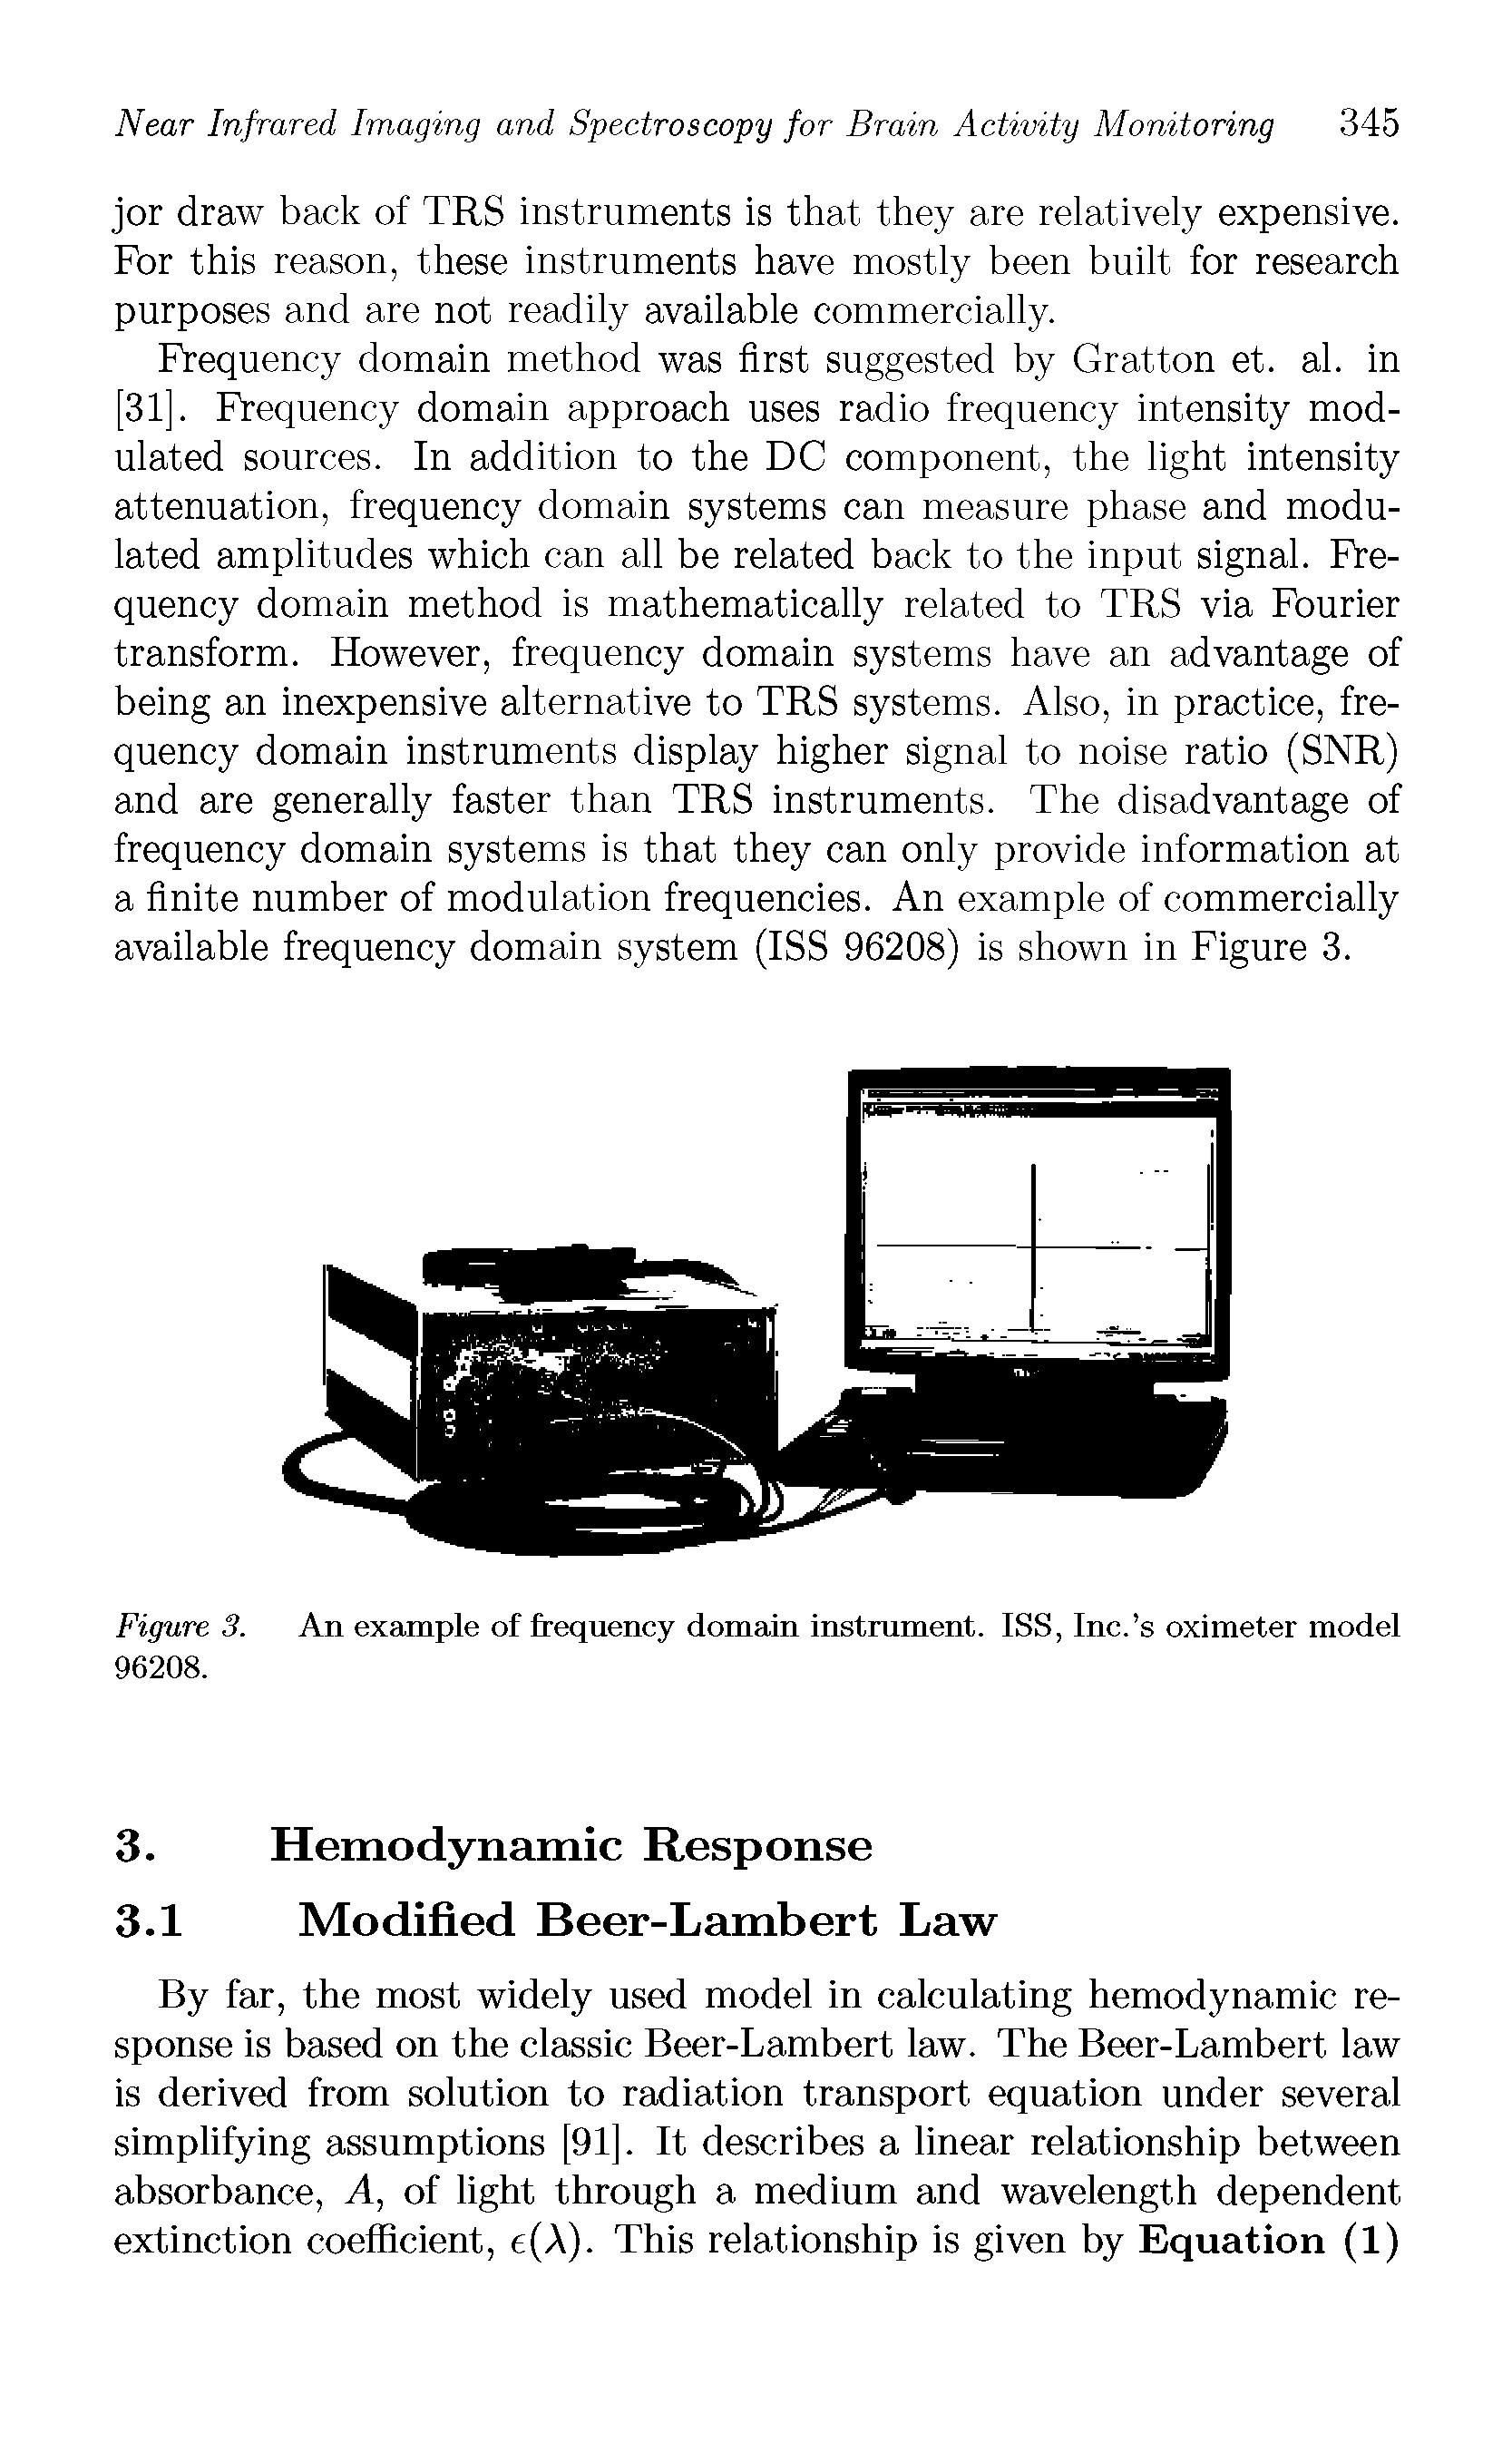 Figure 3. An example of frequency domain instrument. ISS, Inc. s oximeter model 96208.